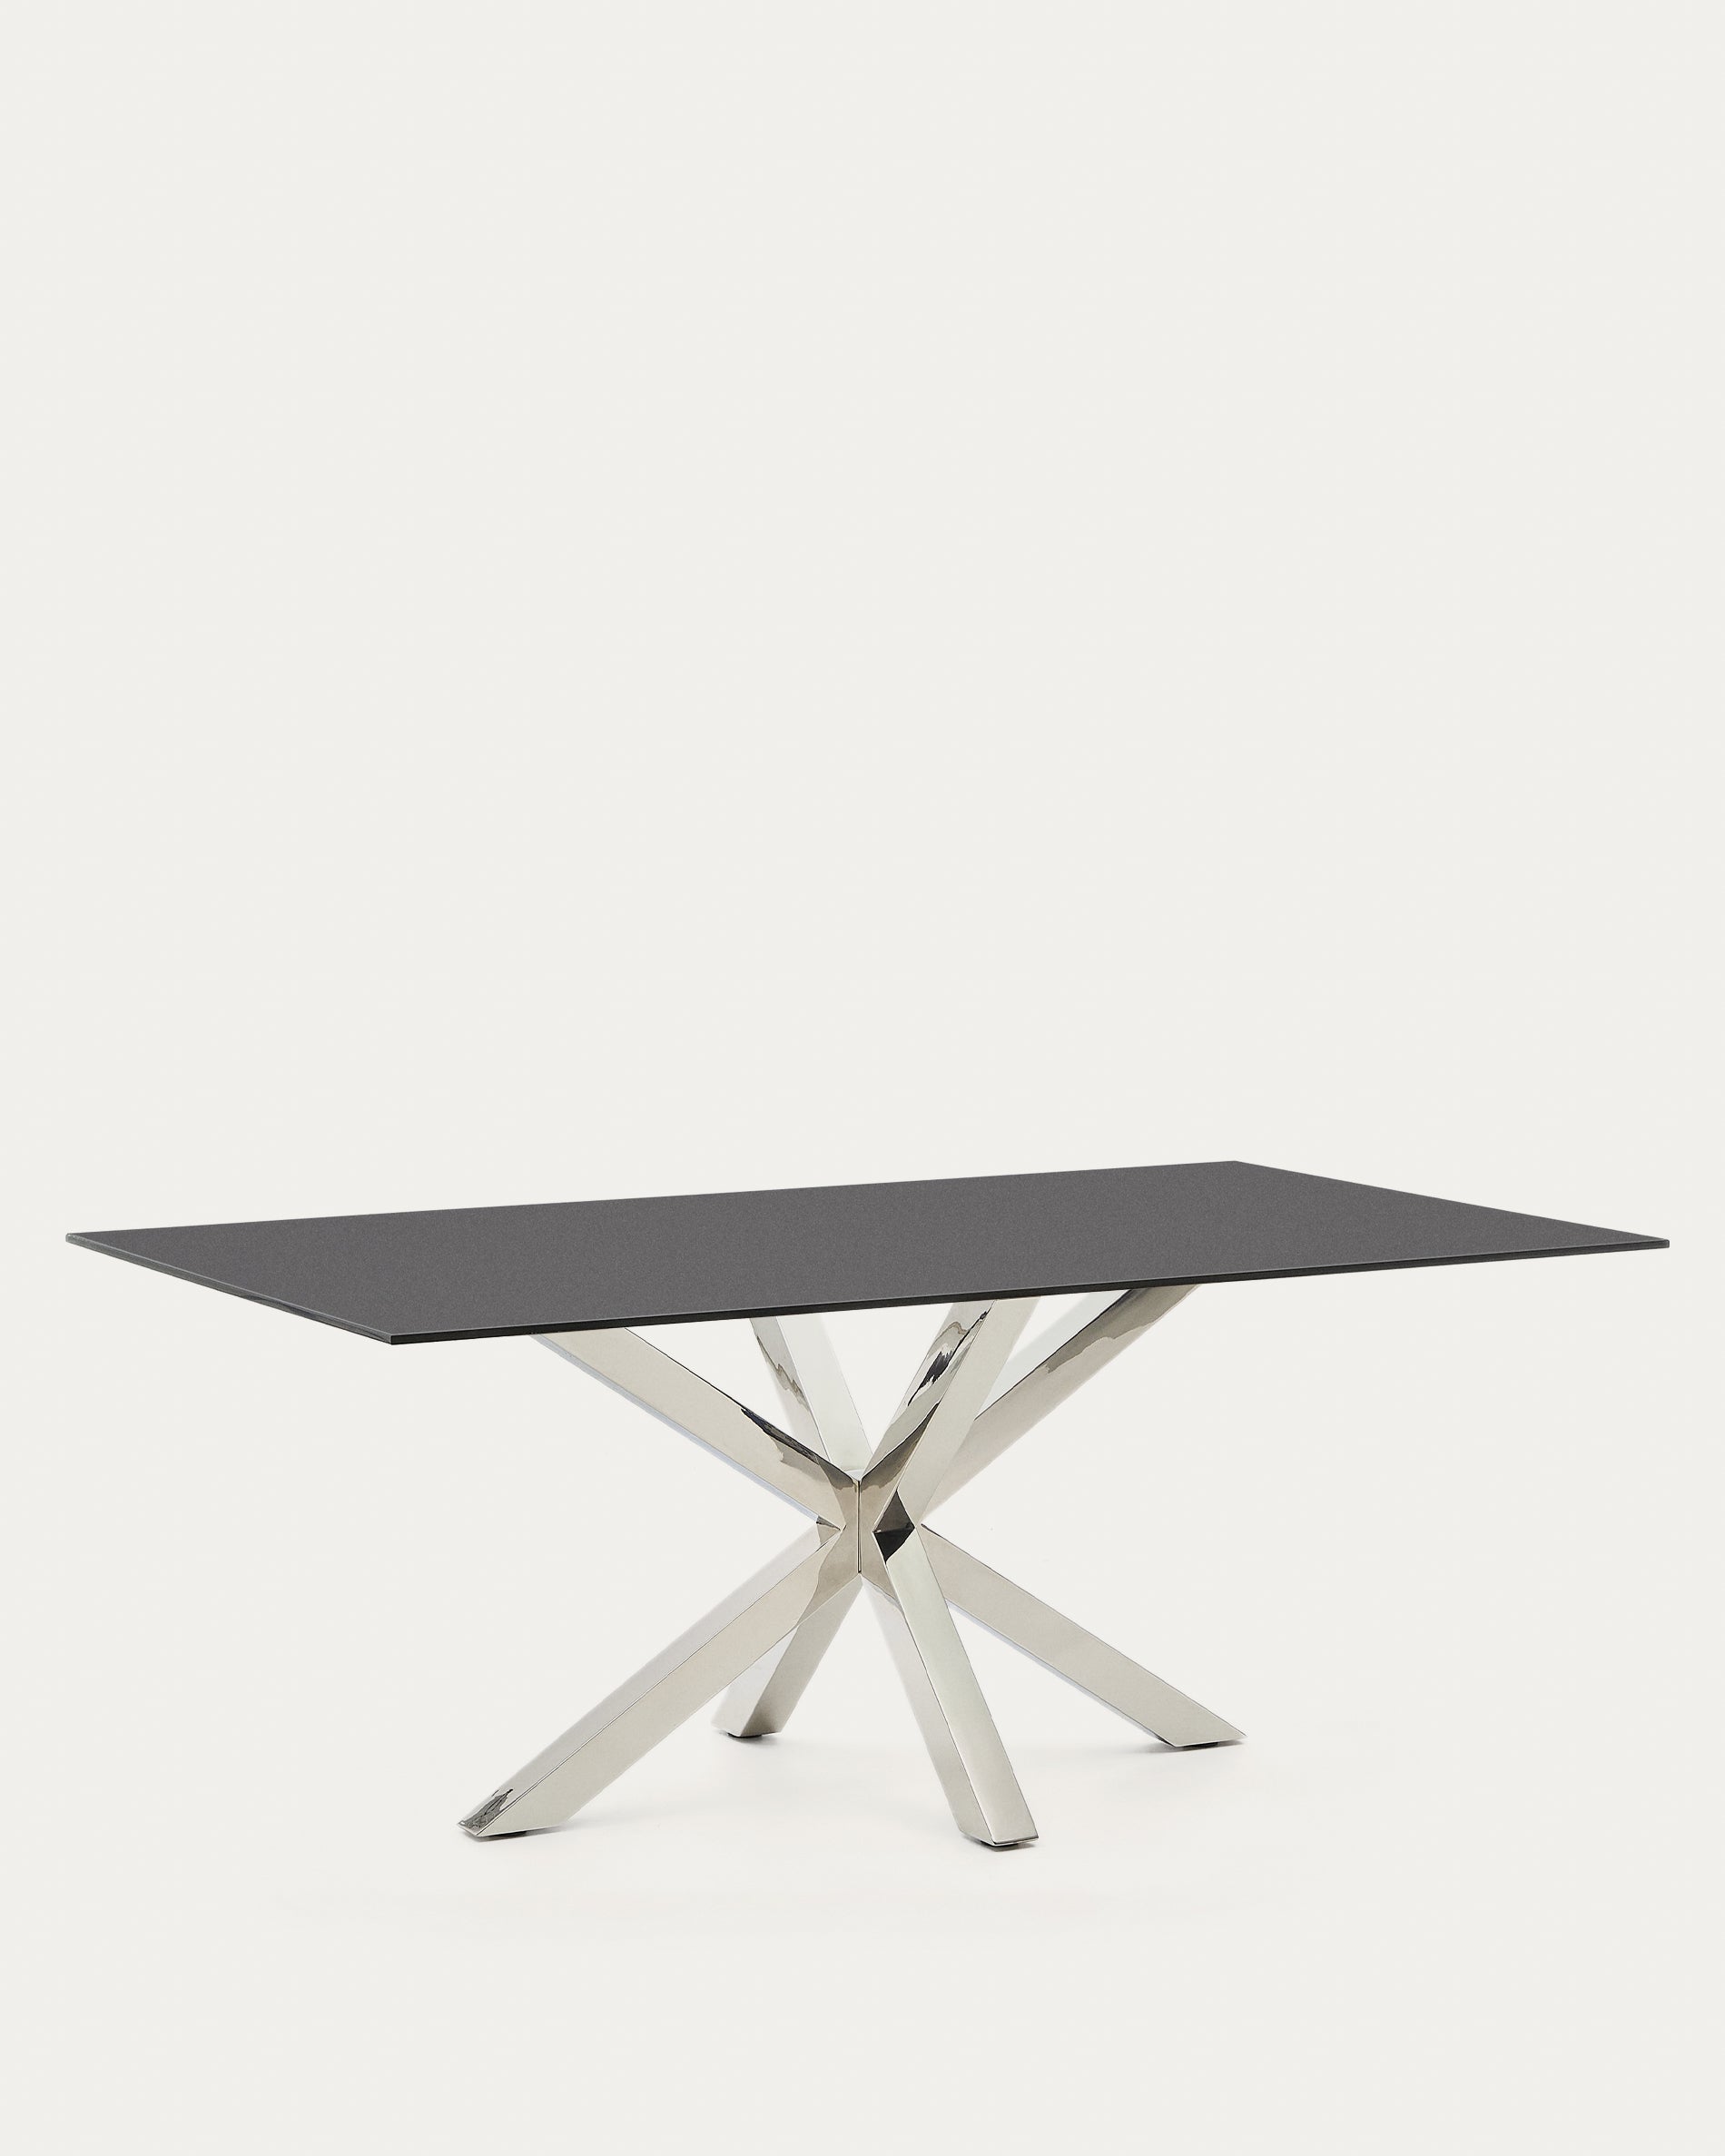 Argo table with black glass and steel legs 200 x 100 cm